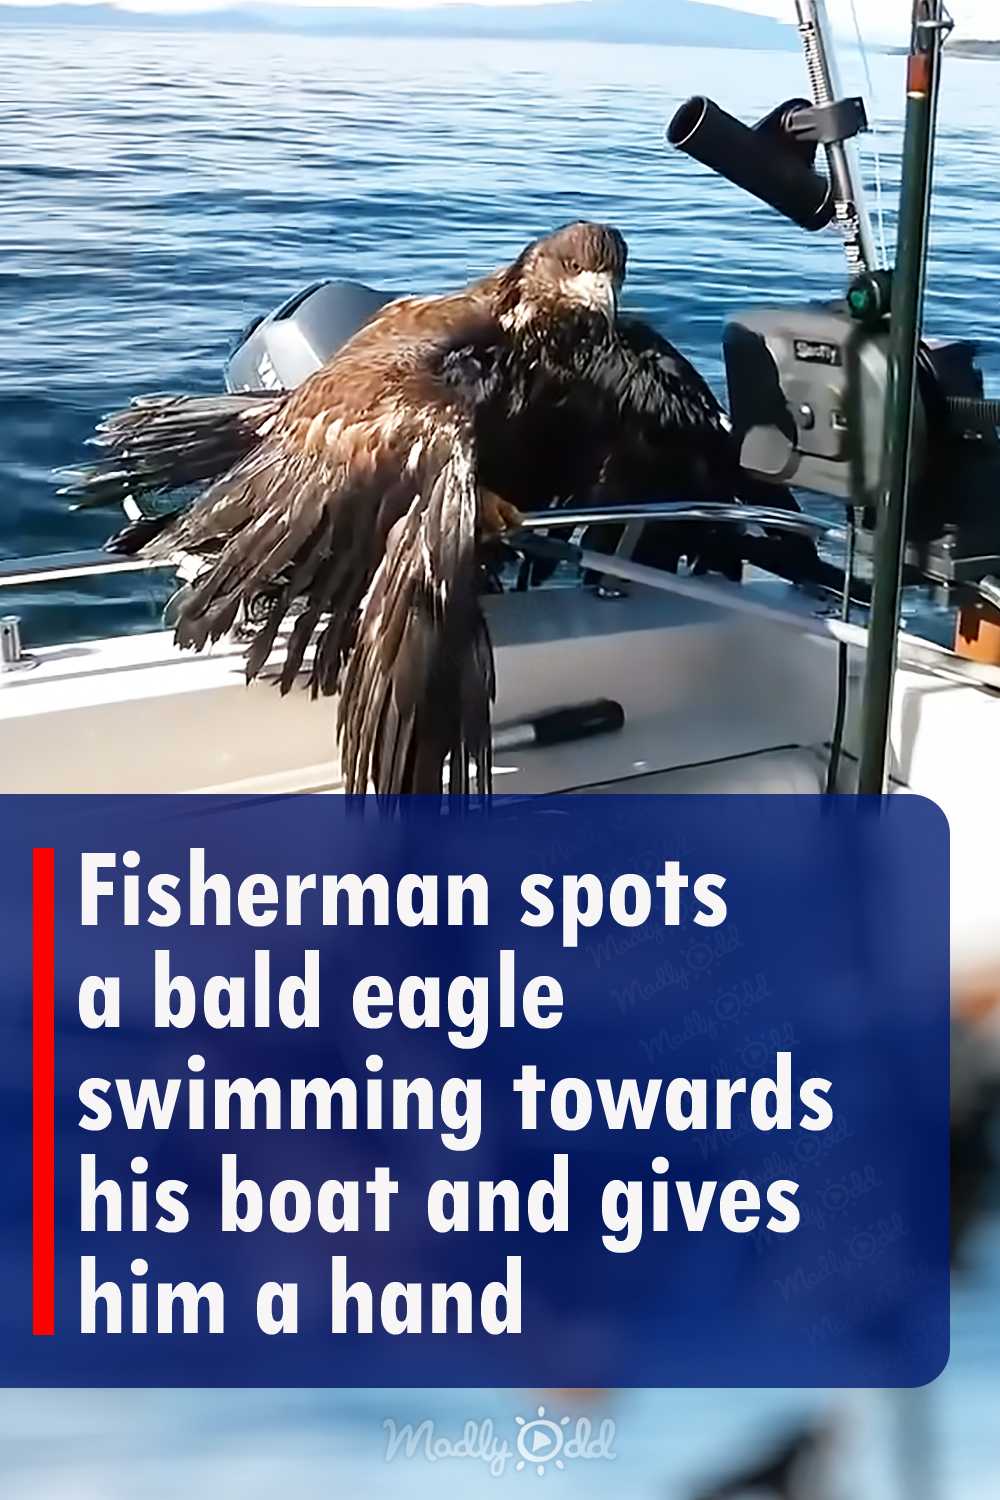 Fisherman spots a bald eagle swimming towards his boat and gives him a hand